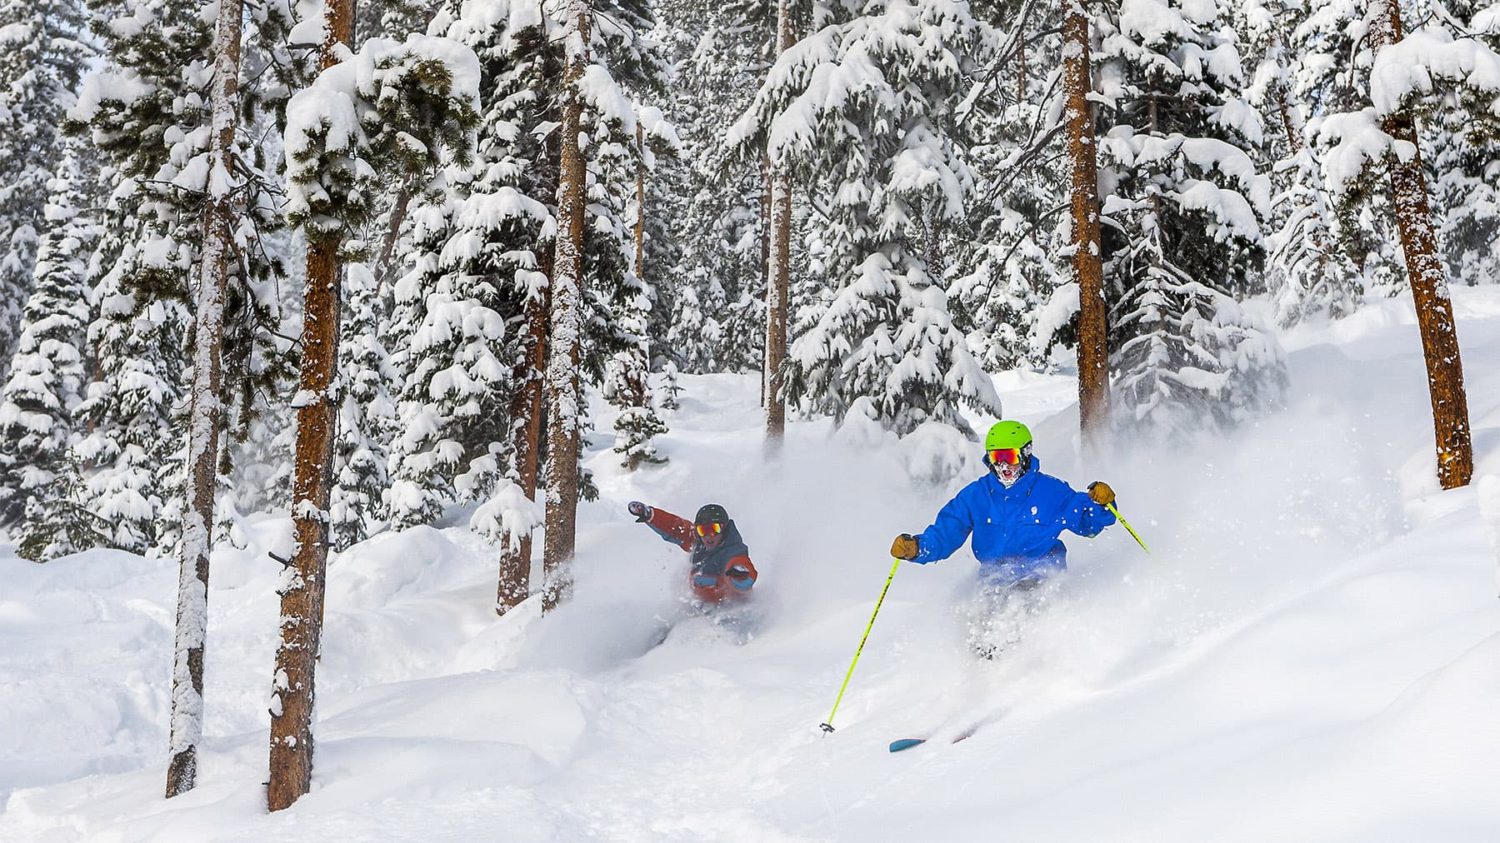 Winter Park, Intrawest, Steamboat, Squaw Valley, Mammoth, colorado